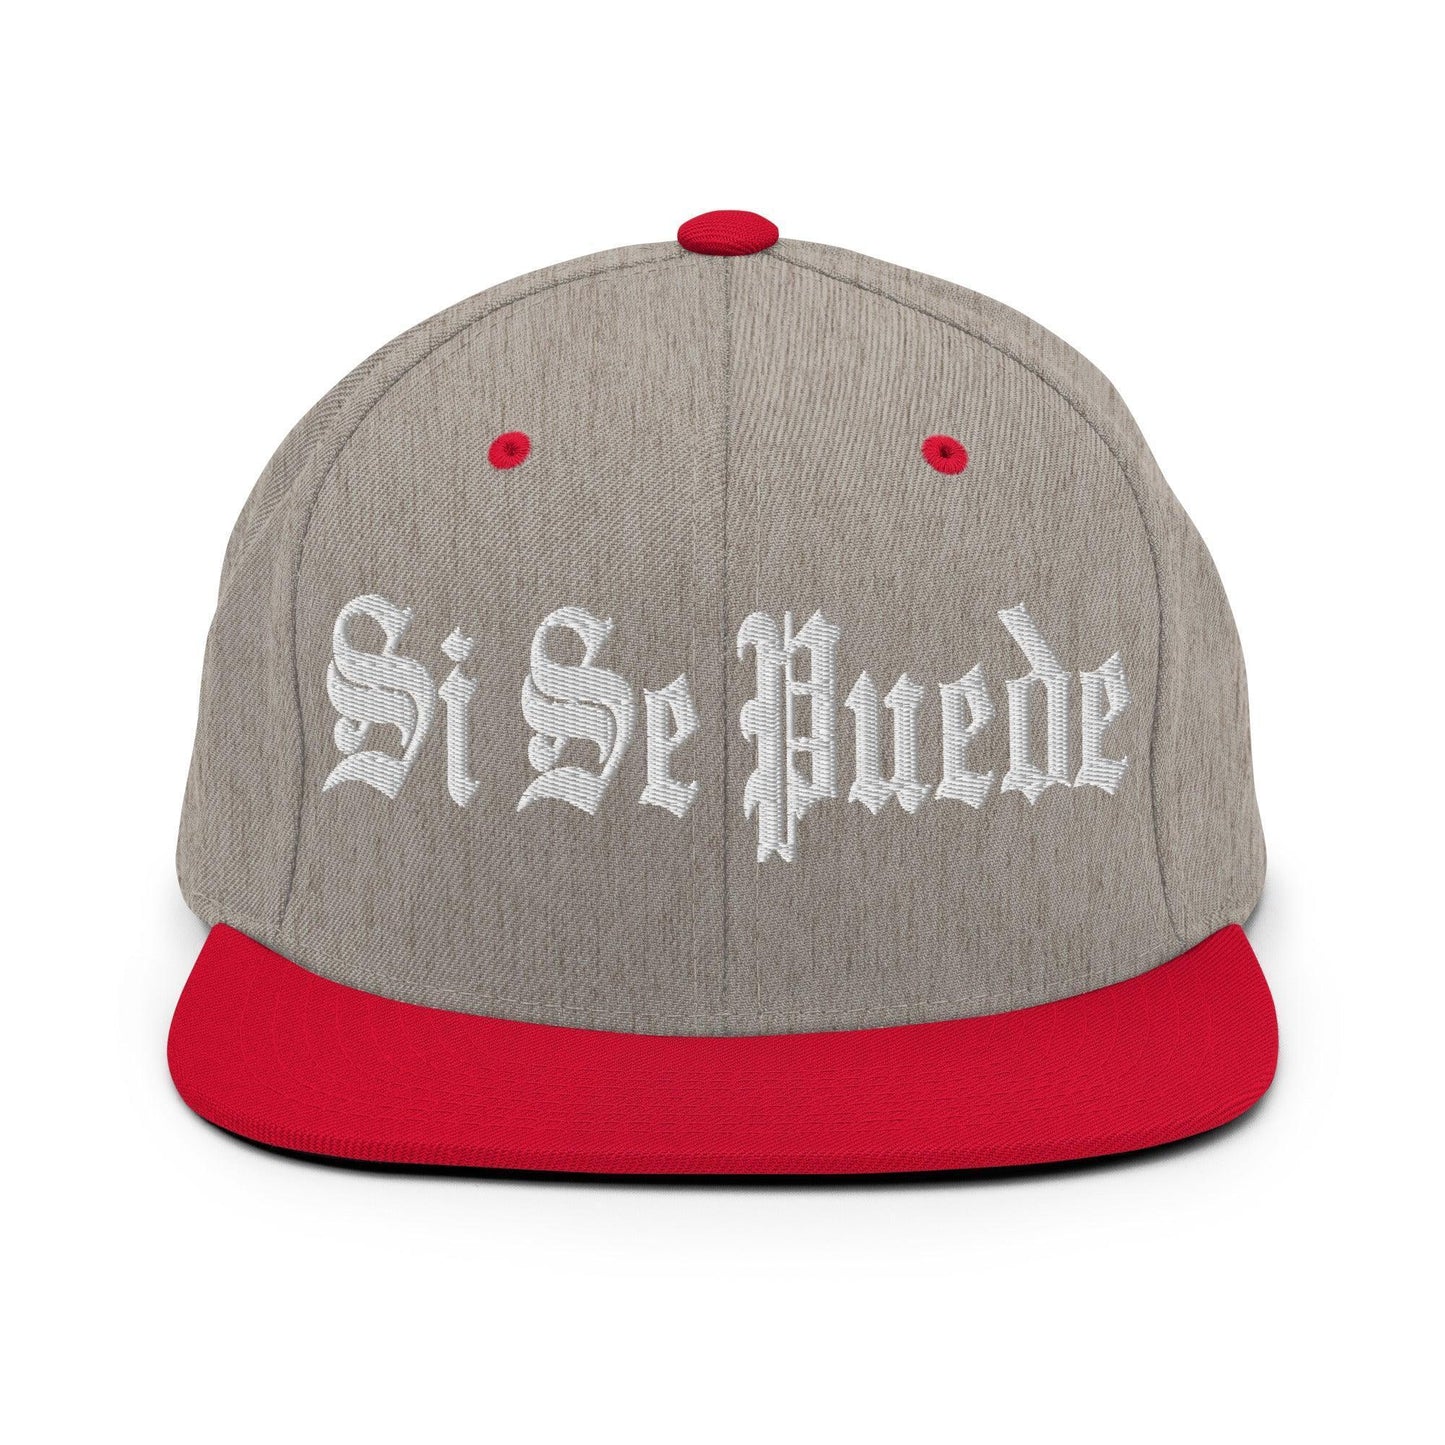 Si Se Puede Old English Snapback Hat Heather Grey/ Red